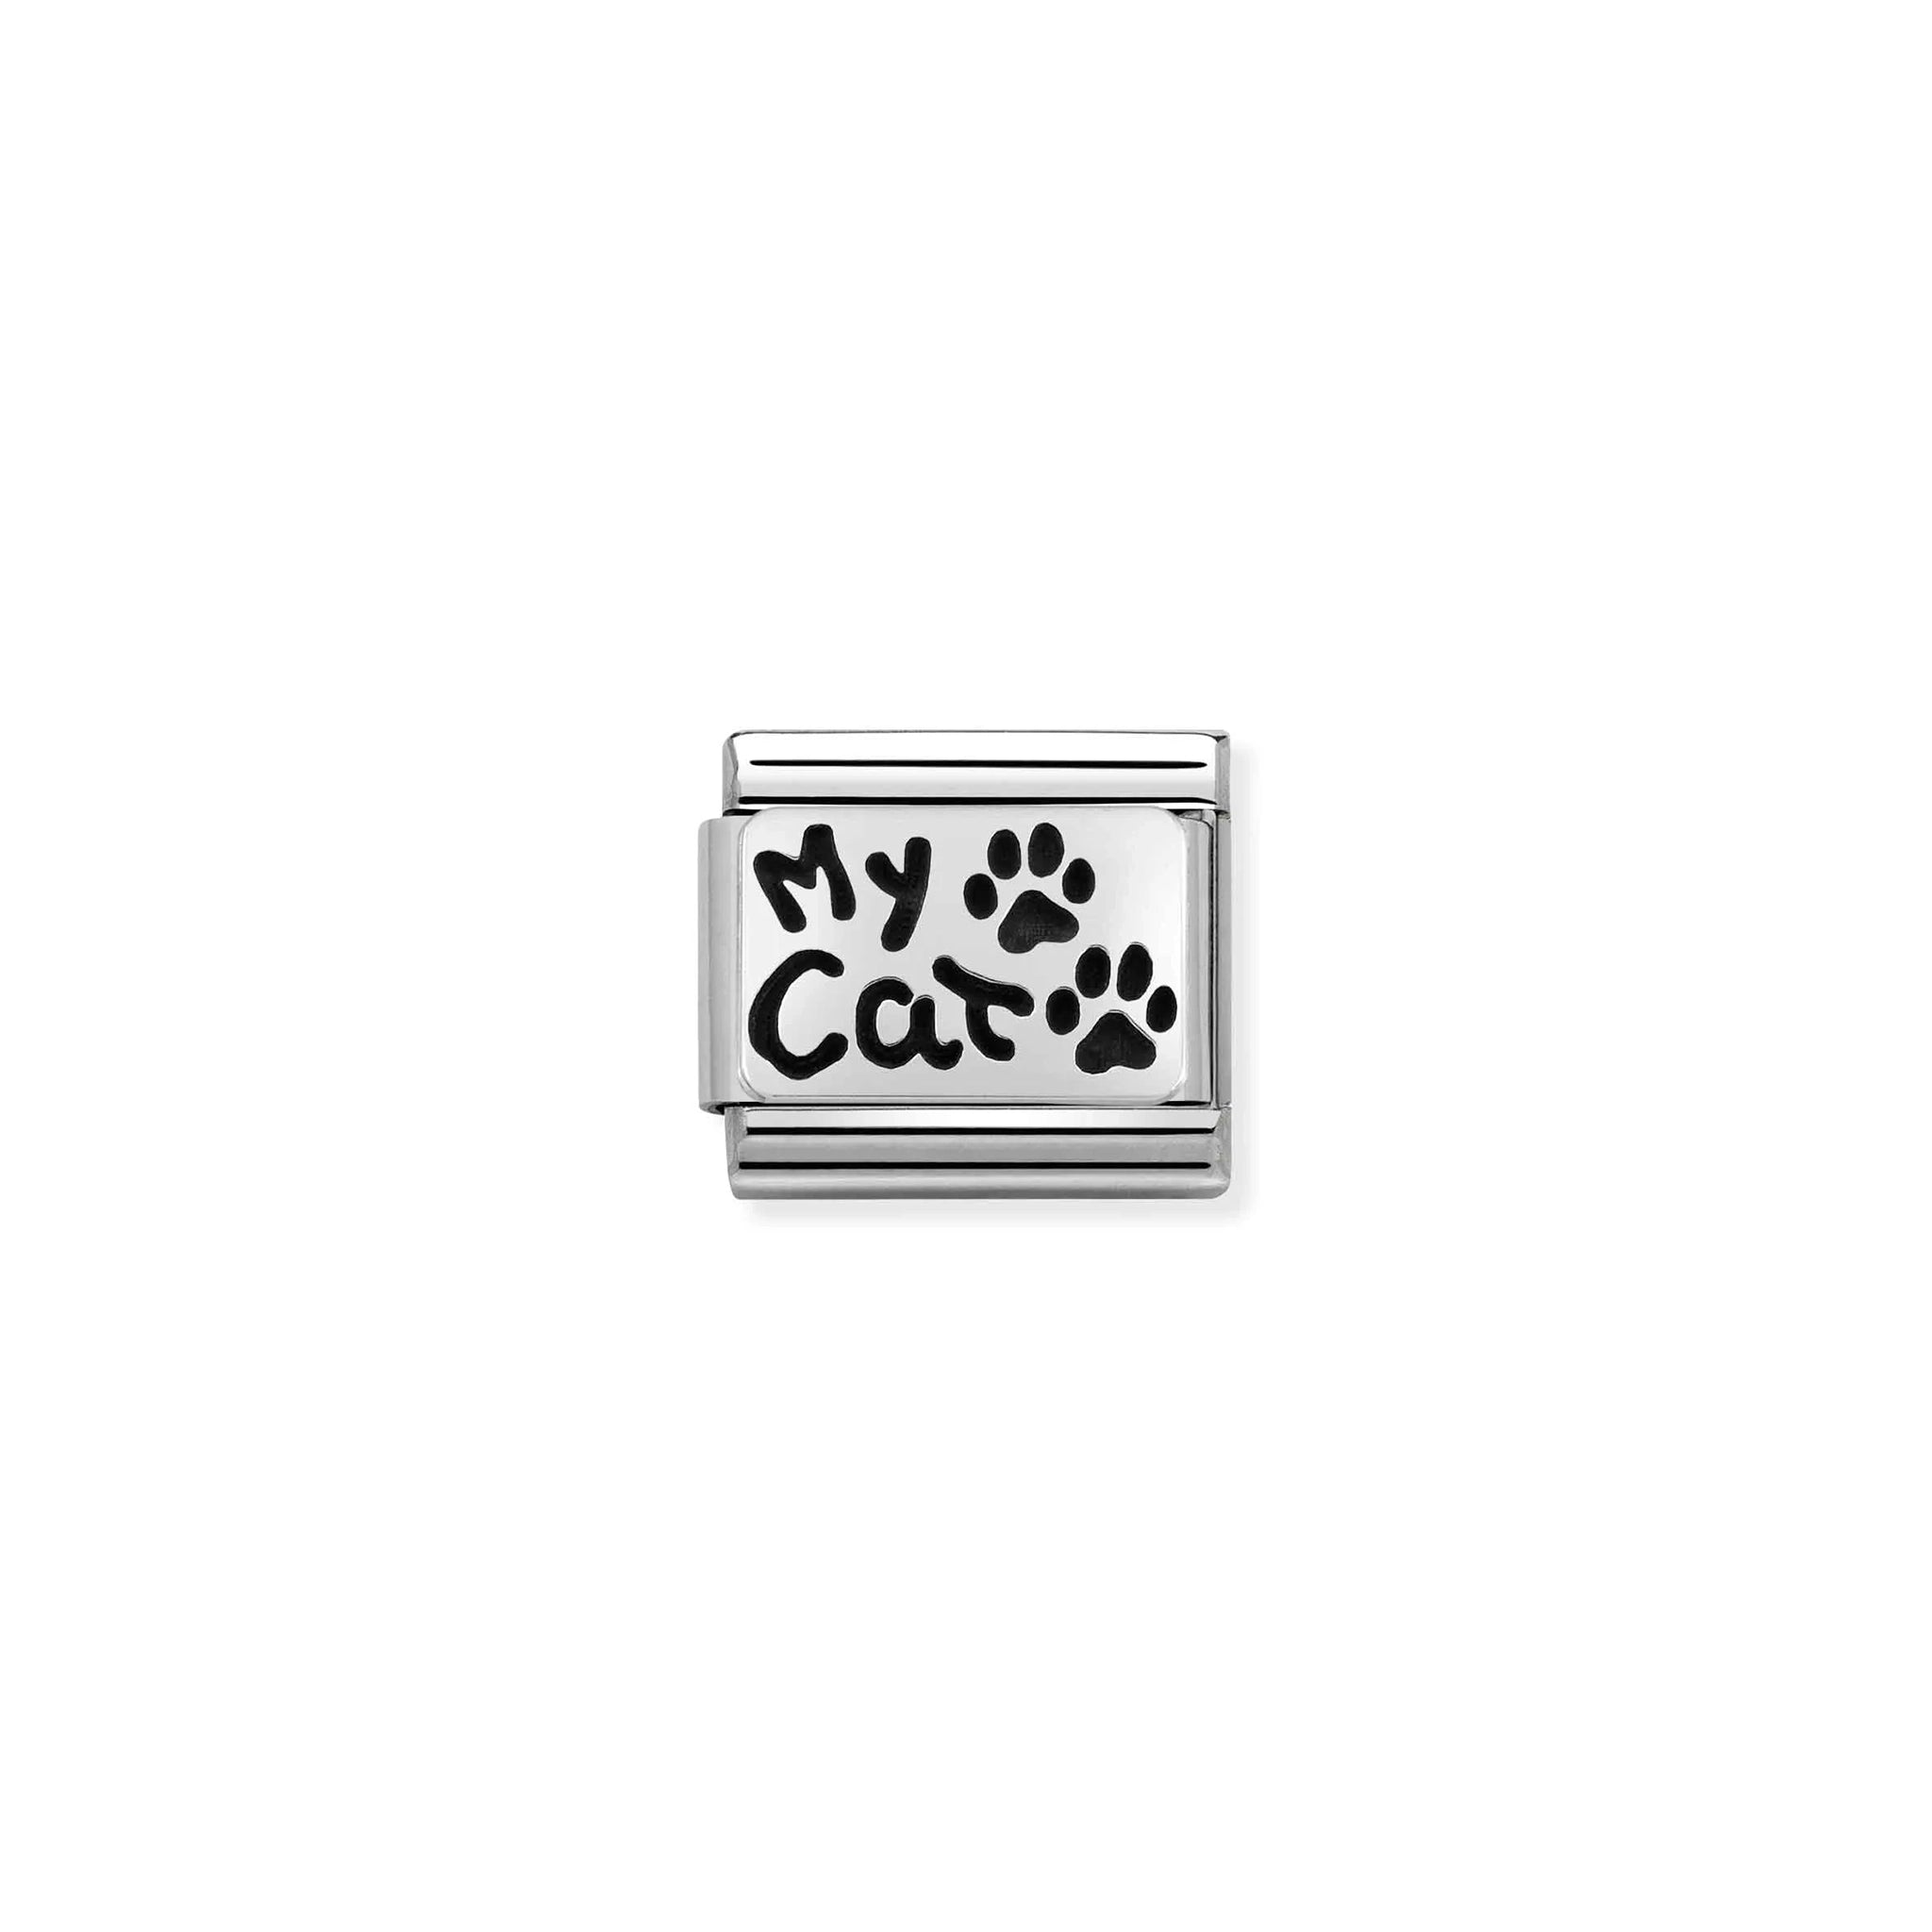 Nomination charm with silver plaque featuring 'My Cat' in black enamel with two paw prints